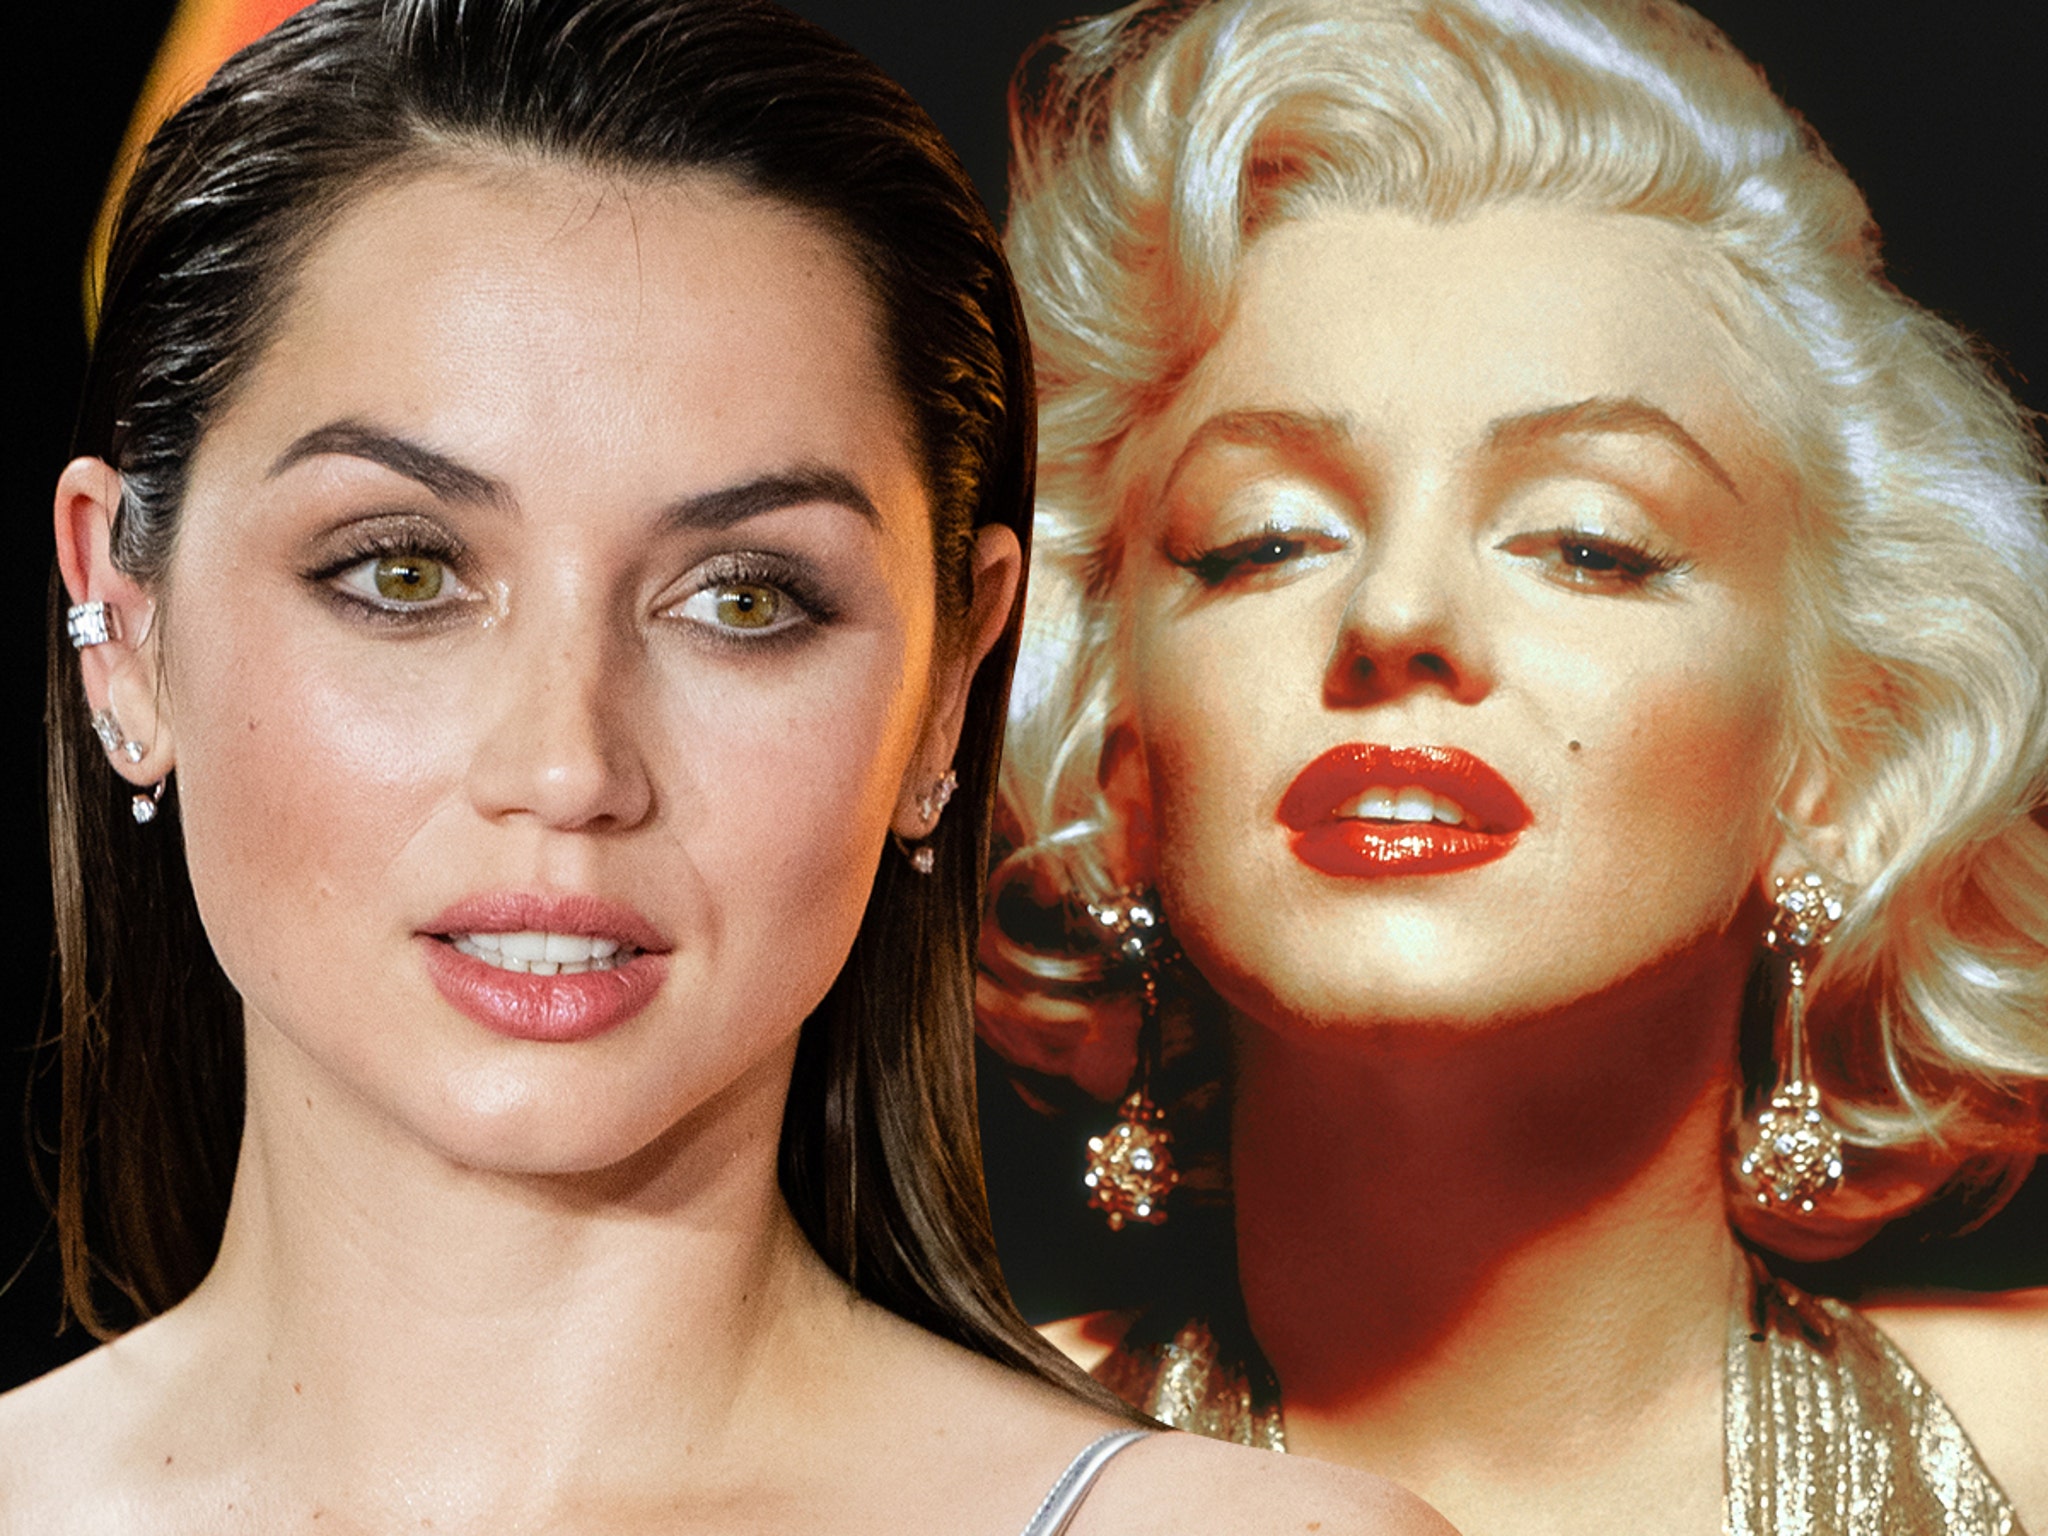 Ana de Armas' Accent Picked Apart in New Marilyn Monroe 'Blonde' Trailer